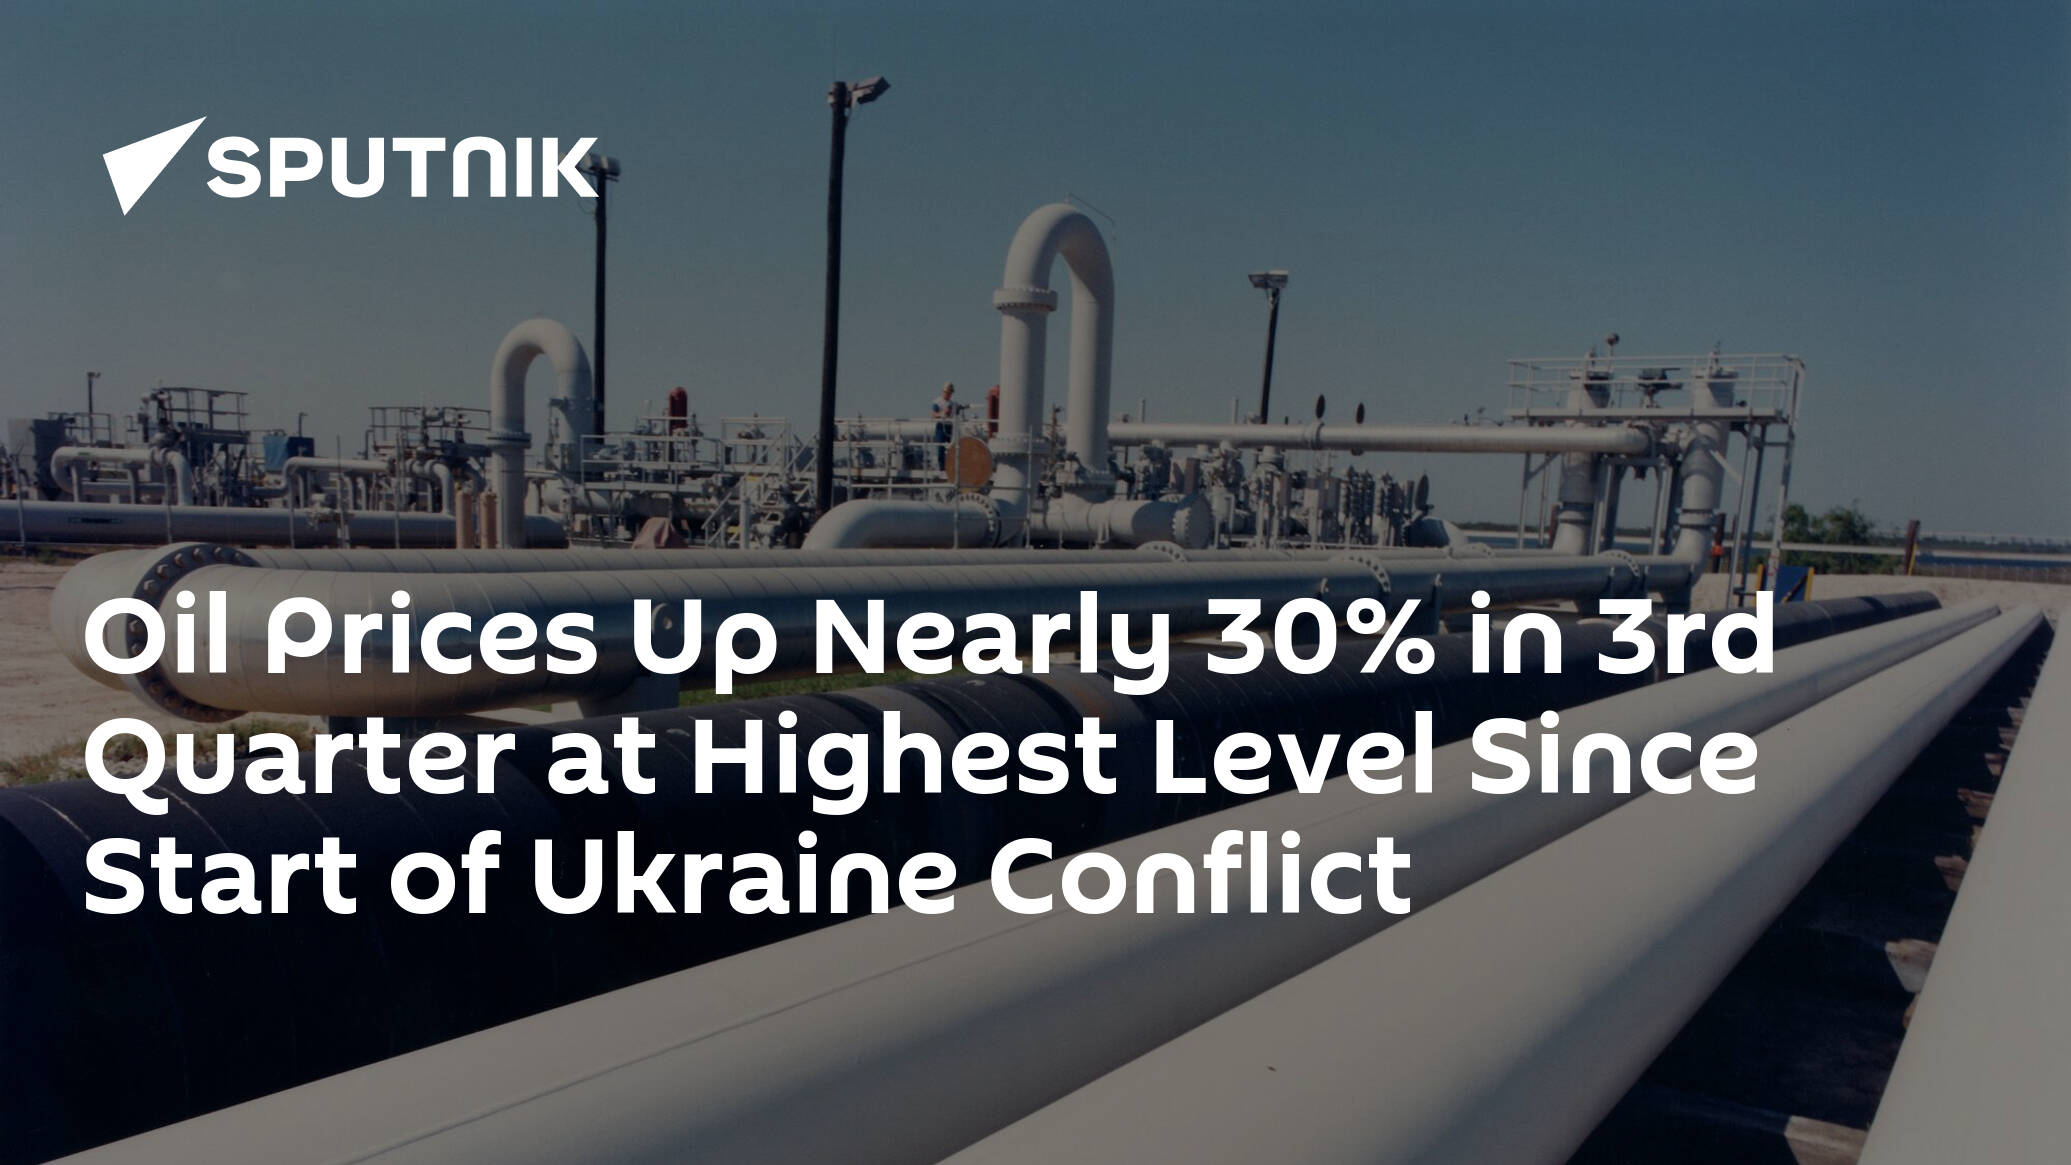 Oil Prices Up Nearly 30% in 3rd Quarter at Highest Level Since Start of Ukraine Conflict